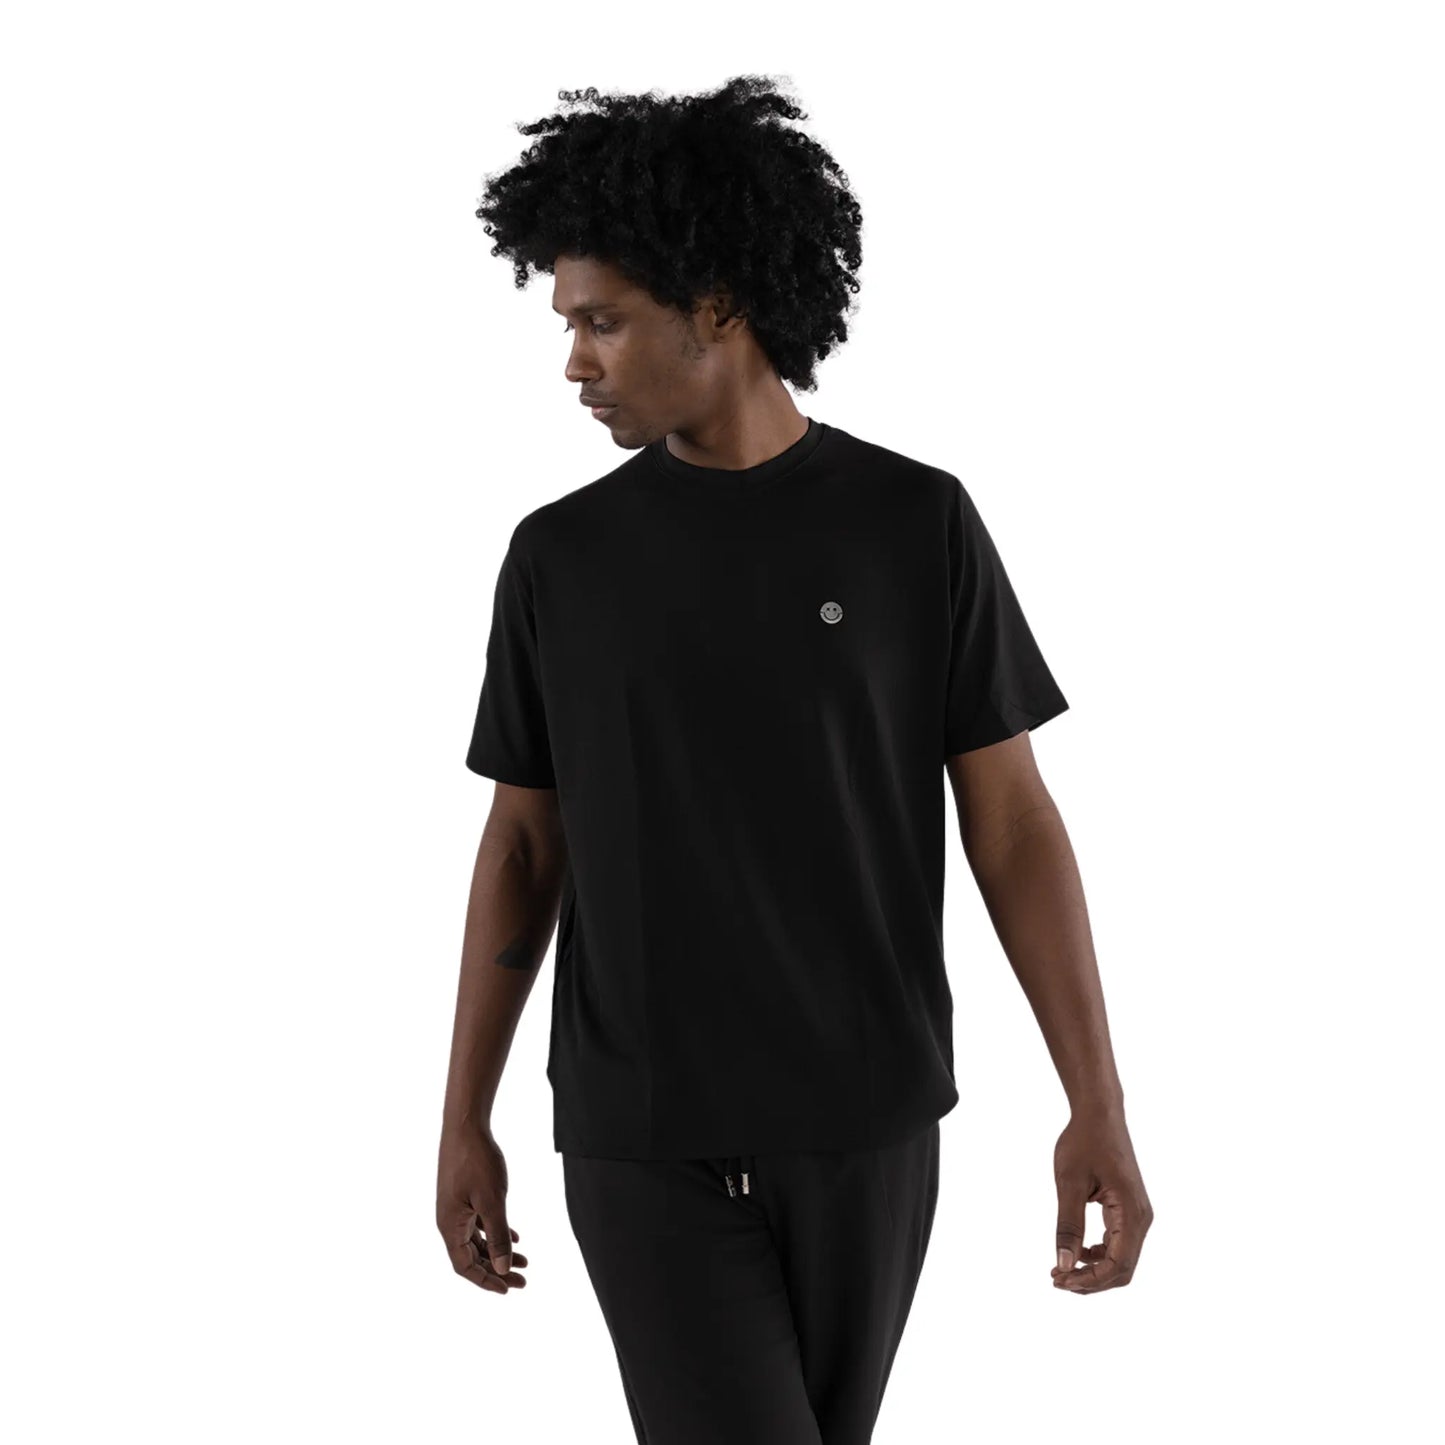 L’Homme Moderne Smiley Regular Fit T-shirt worn by black man front view close up